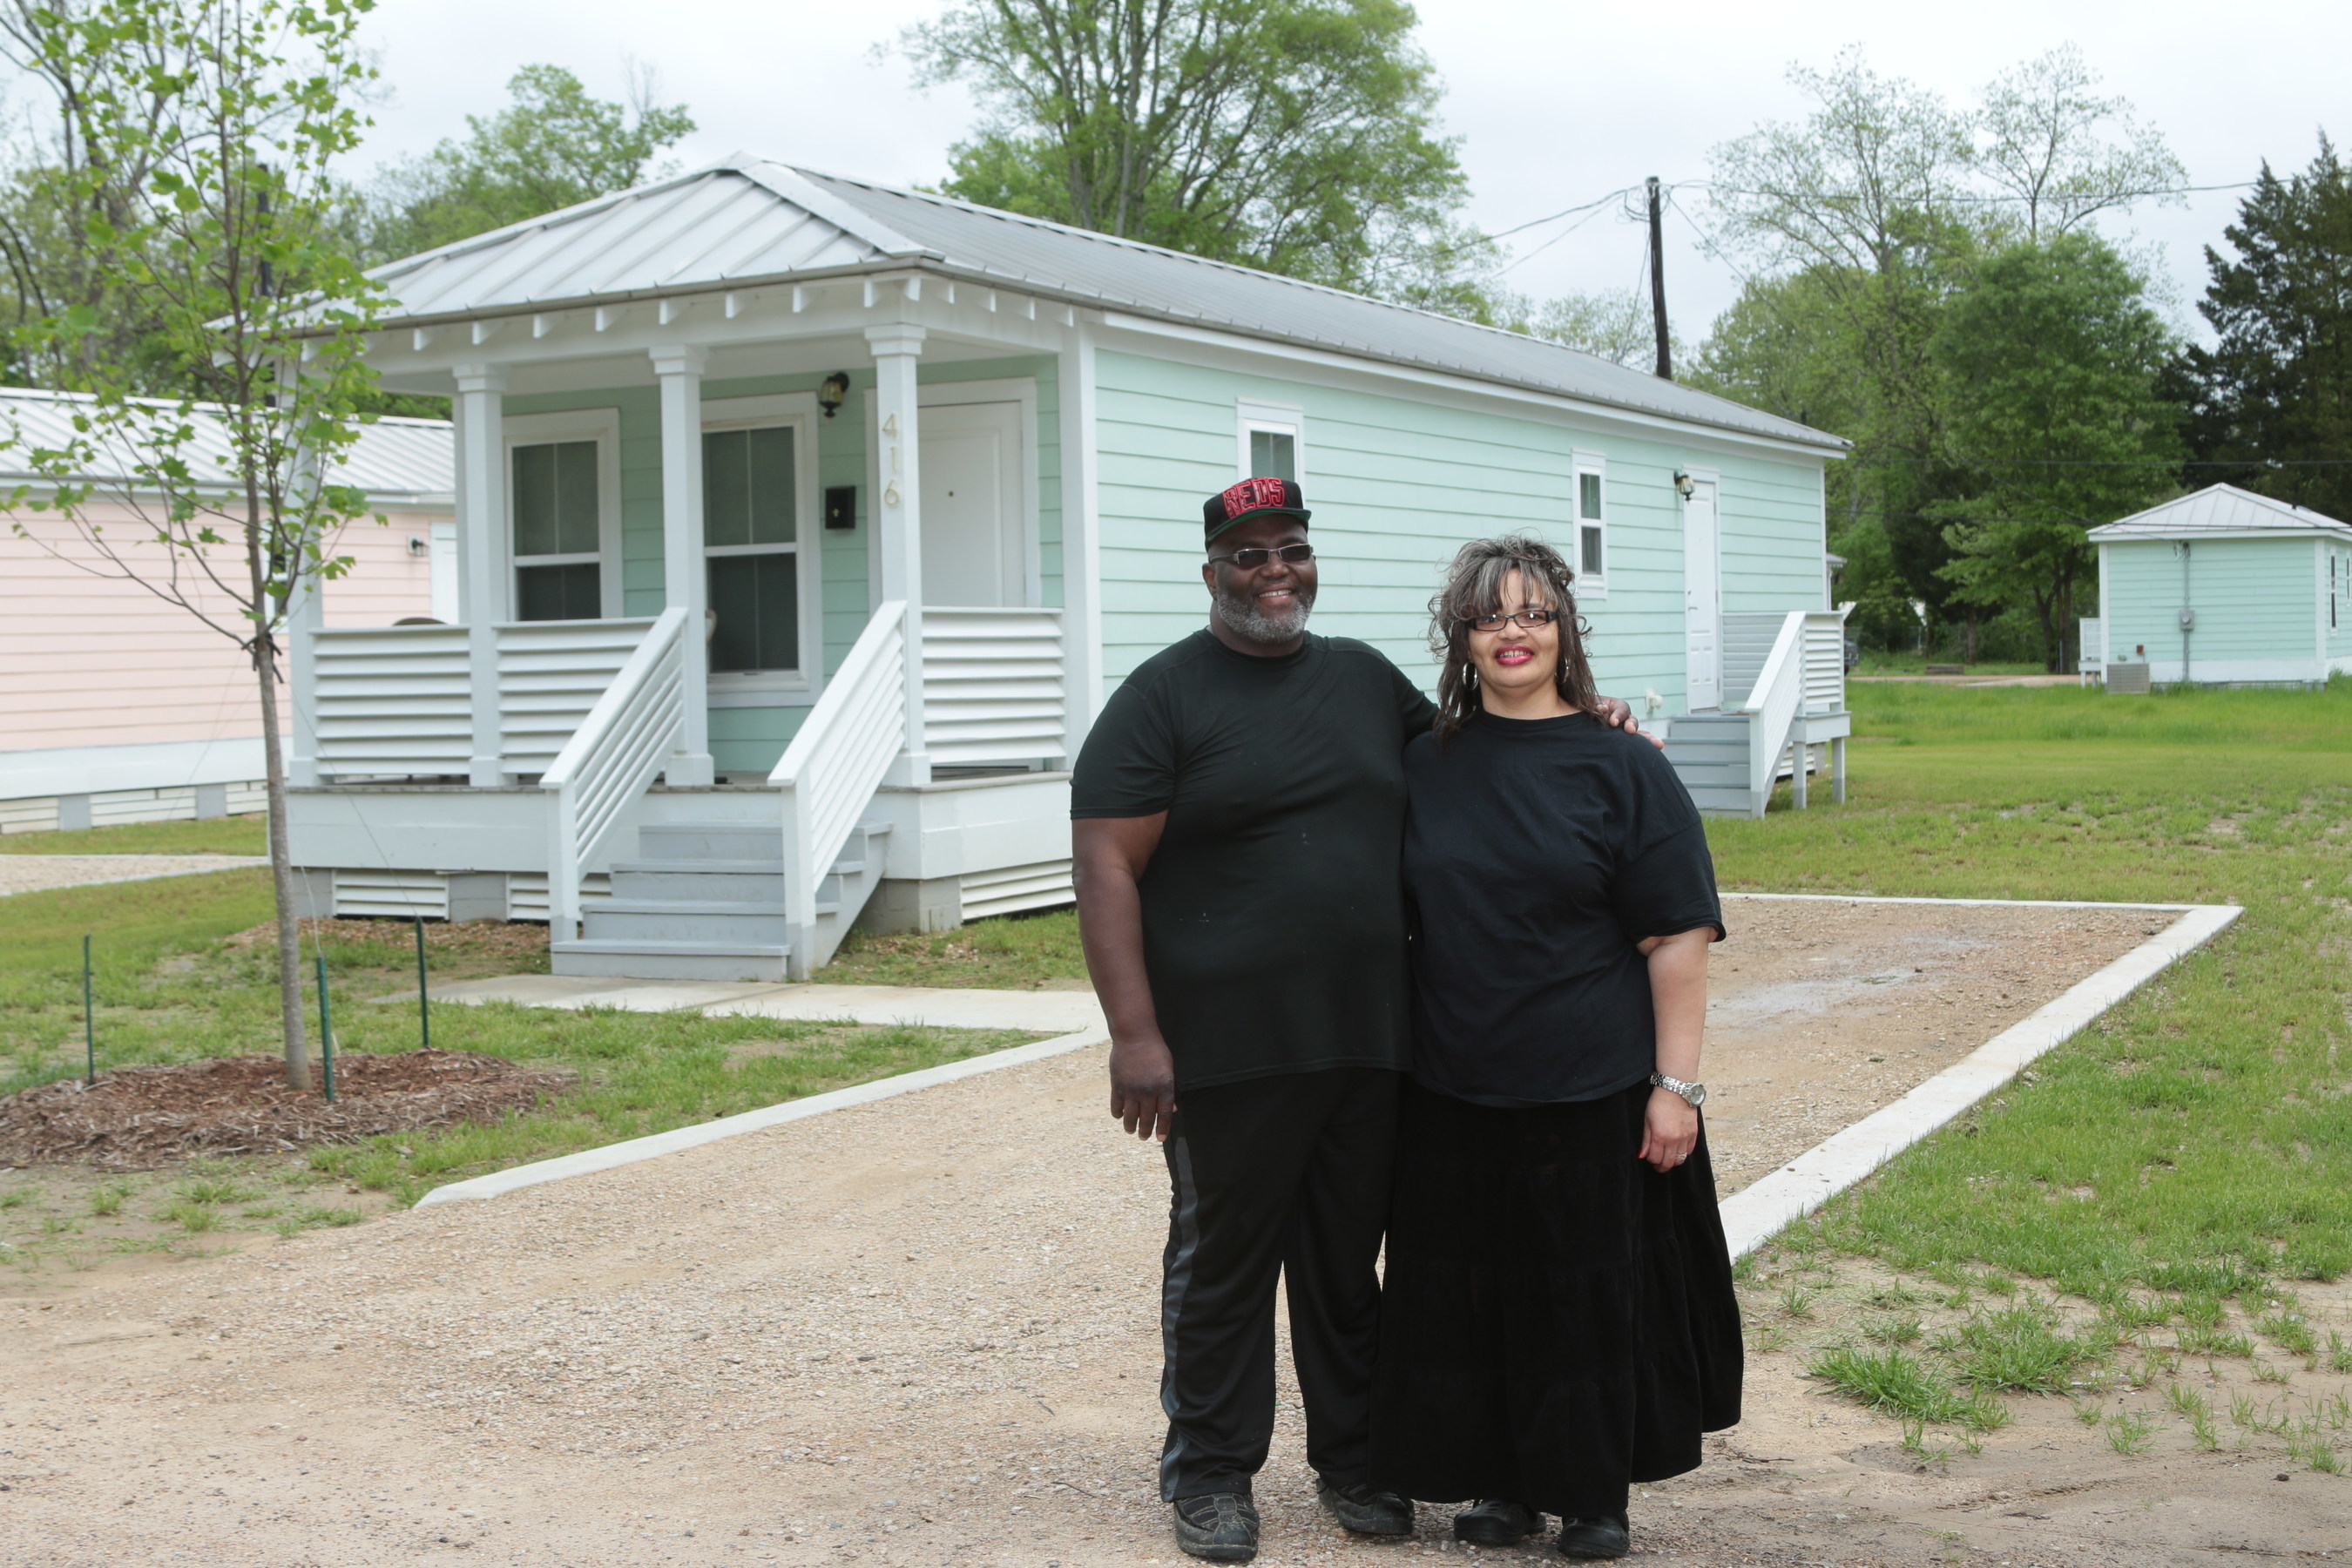 Lora and Michael Gallion were awarded a $4,000 Homebuyer Equity Leverage Partnership (HELP) grant from Planters Bank & Trust Company and the Federal Home Loan Bank of Dallas. The grant helped them purchase one of the Baptist Town Cottages in Greenwood, Mississippi. For more information about HELP grants, contact Planters Bank & Trust Company.